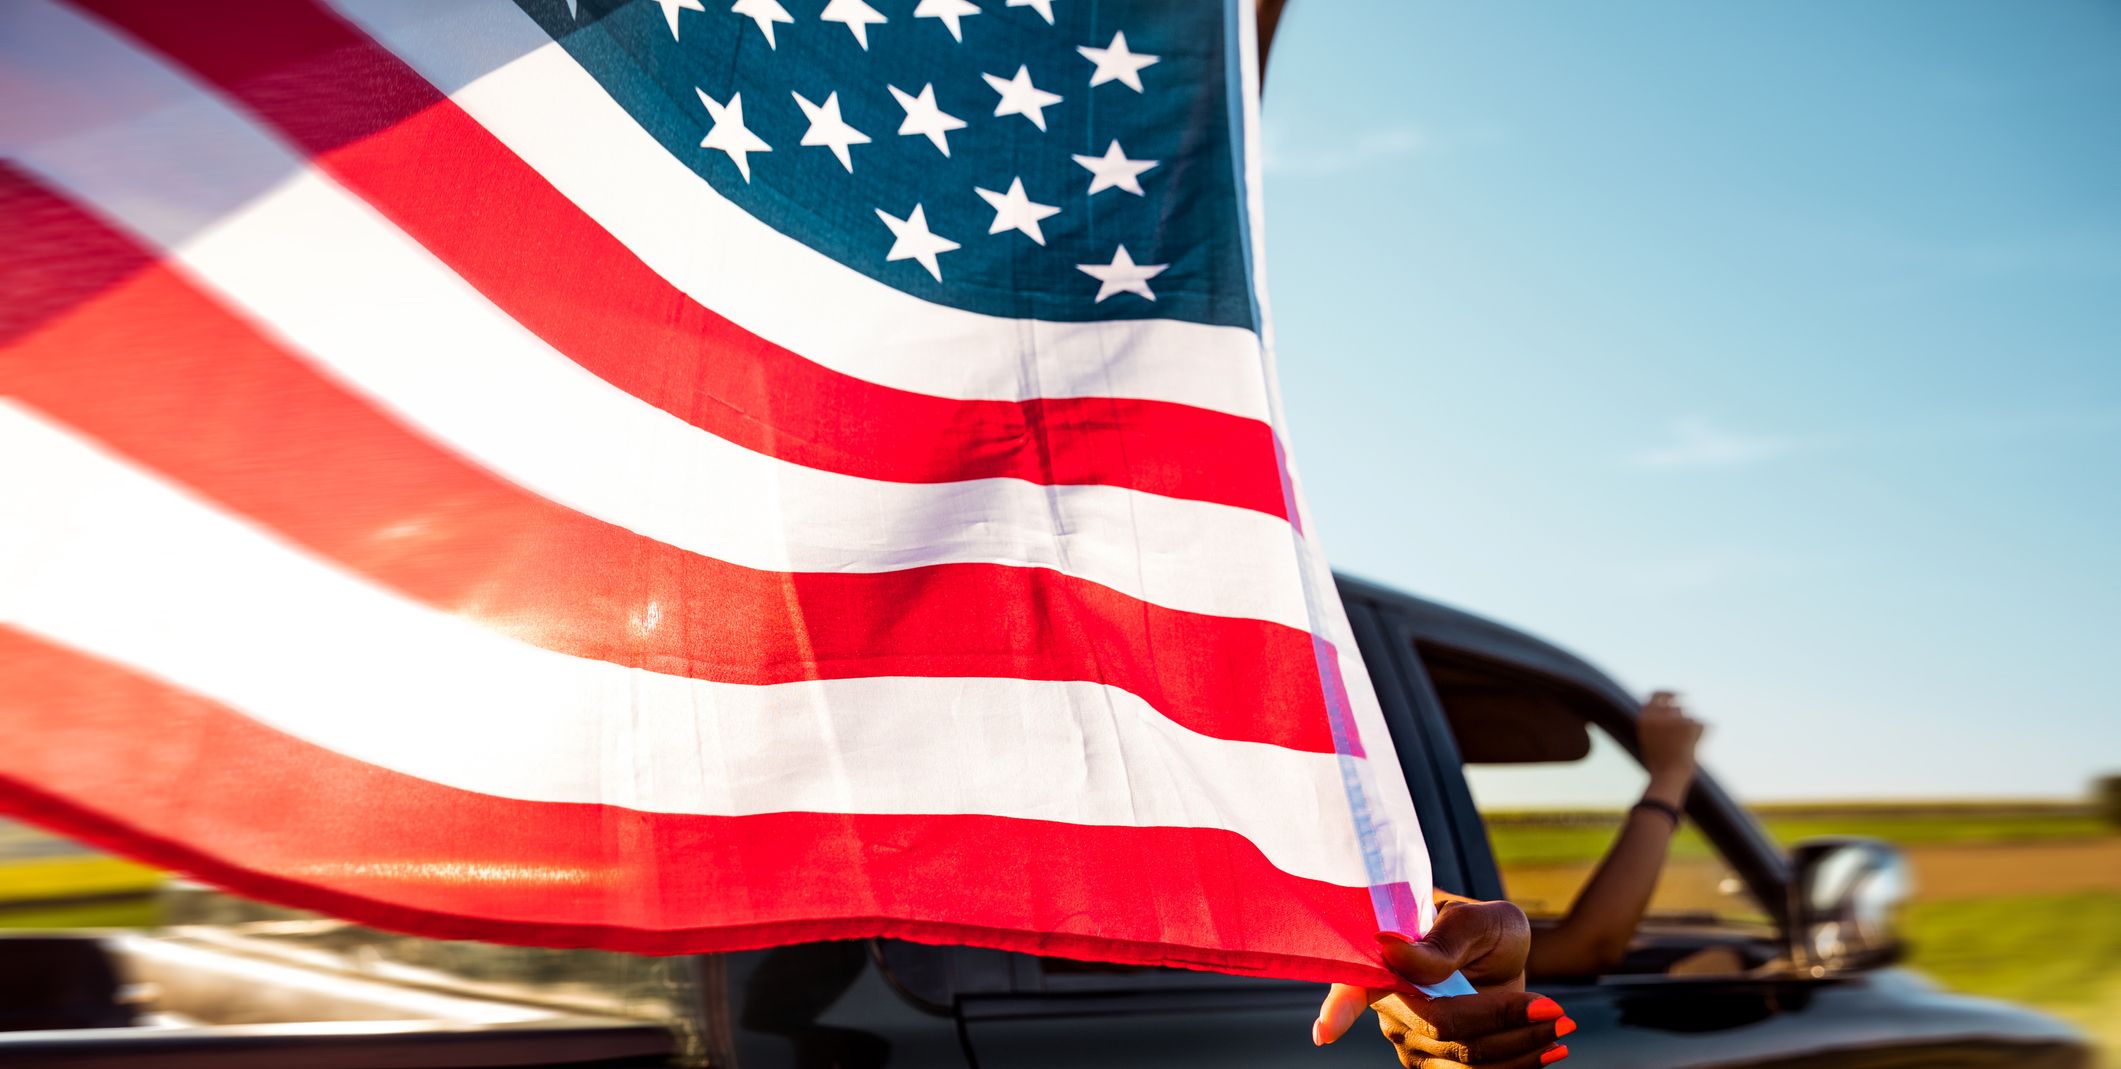 American Flag Etiquette for Your Vehicle